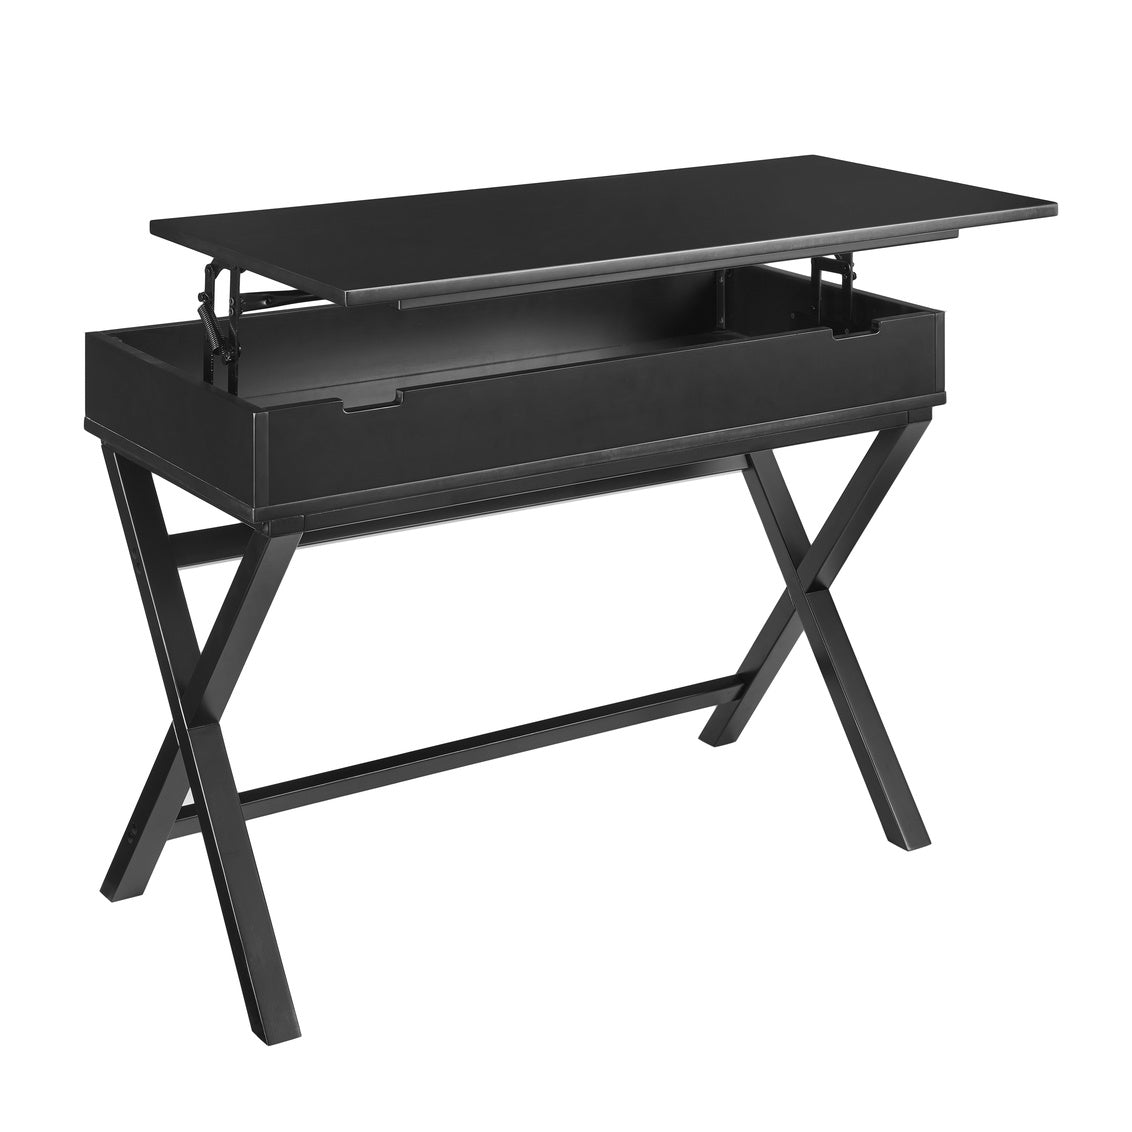 Awesome Black Lift Top Desk